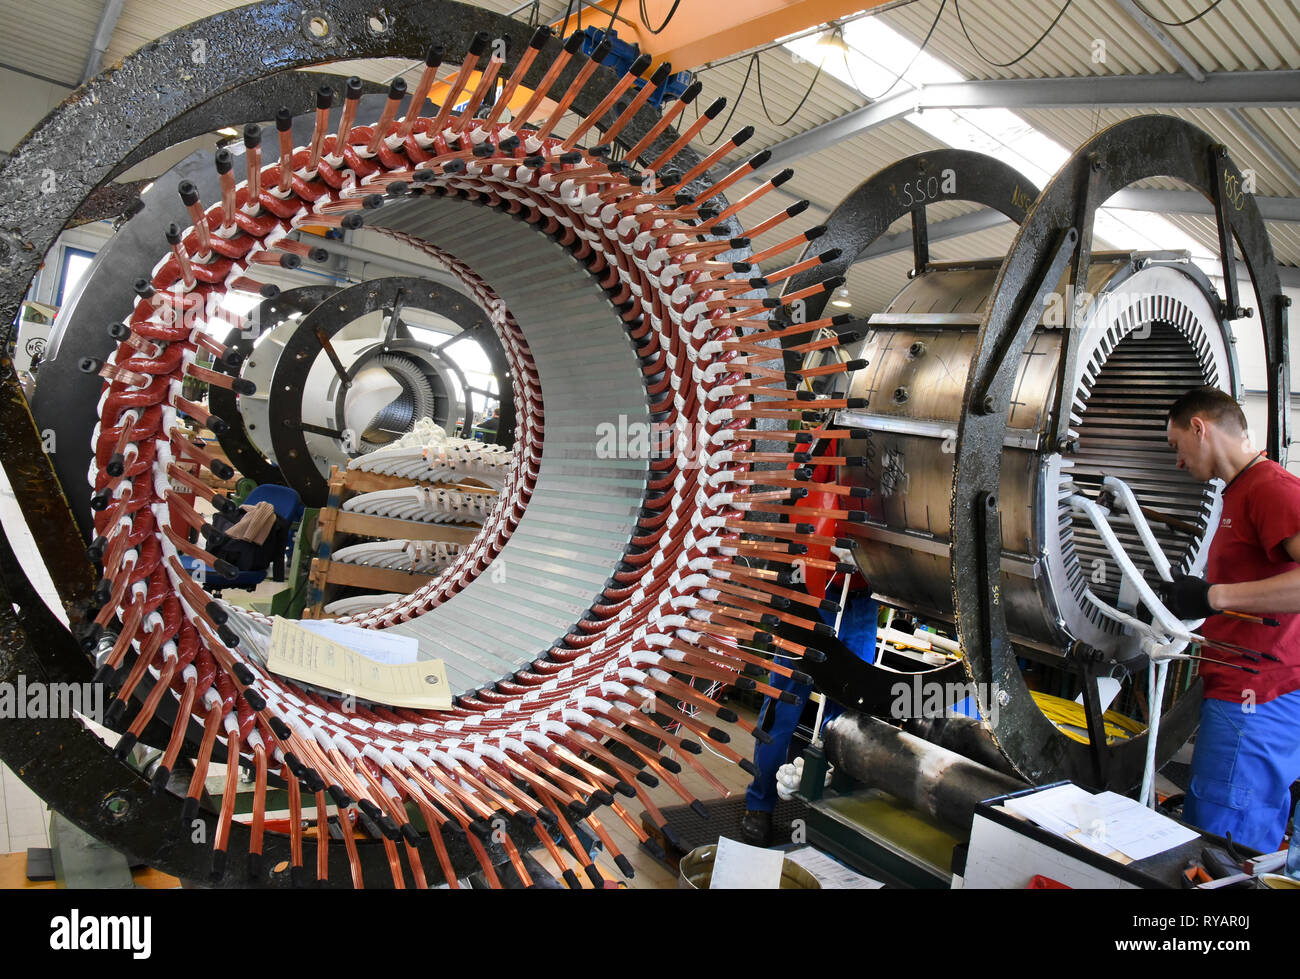 Bitterfeld Wolfen, Germany. 11th Mar, 2019. At Pamo Reparaturwerk GmbH, a company of the Partzsch Döbeln Group, an employee works on stators for electric motors and generators. The parts weighing several tons for electrically rotating machines with an output of 100 kilowatts to 250,000 kilovolt amperes are used worldwide in steel mills, power stations, sugar factories and in engine and generator end manufacturers. The company specializes primarily in the repair, maintenance and new manufacture of electrical machines. Credit: Waltraud Grubitzsch/dpa-Zentralbild/ZB/dpa/Alamy Live News Stock Photo